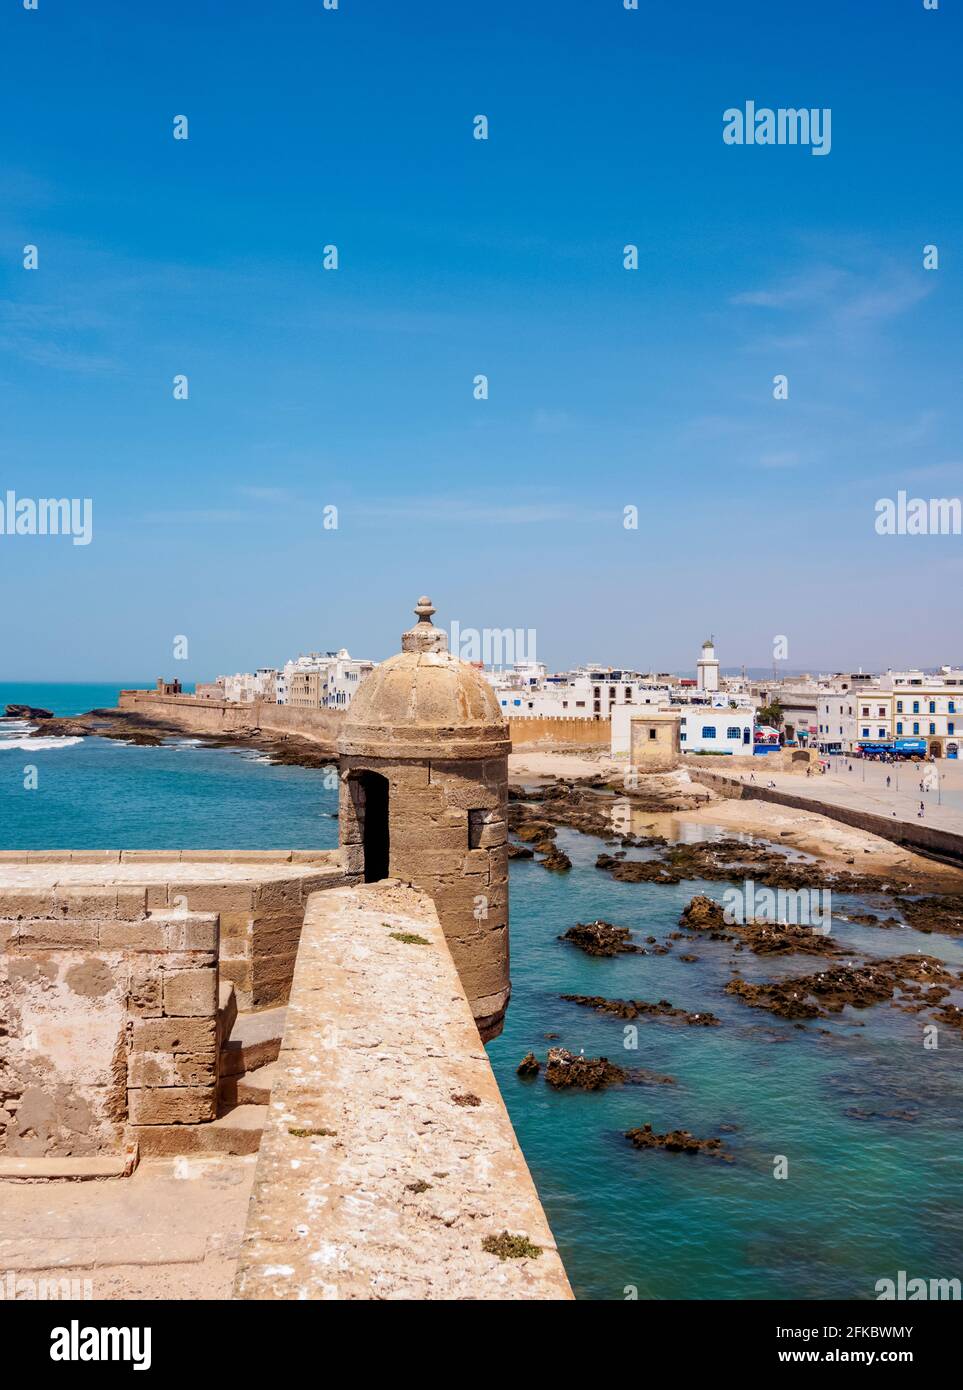 Citadel by the Scala Harbour, Essaouira, Marrakesh-Safi Region, Morocco, North Africa, Africa Stock Photo